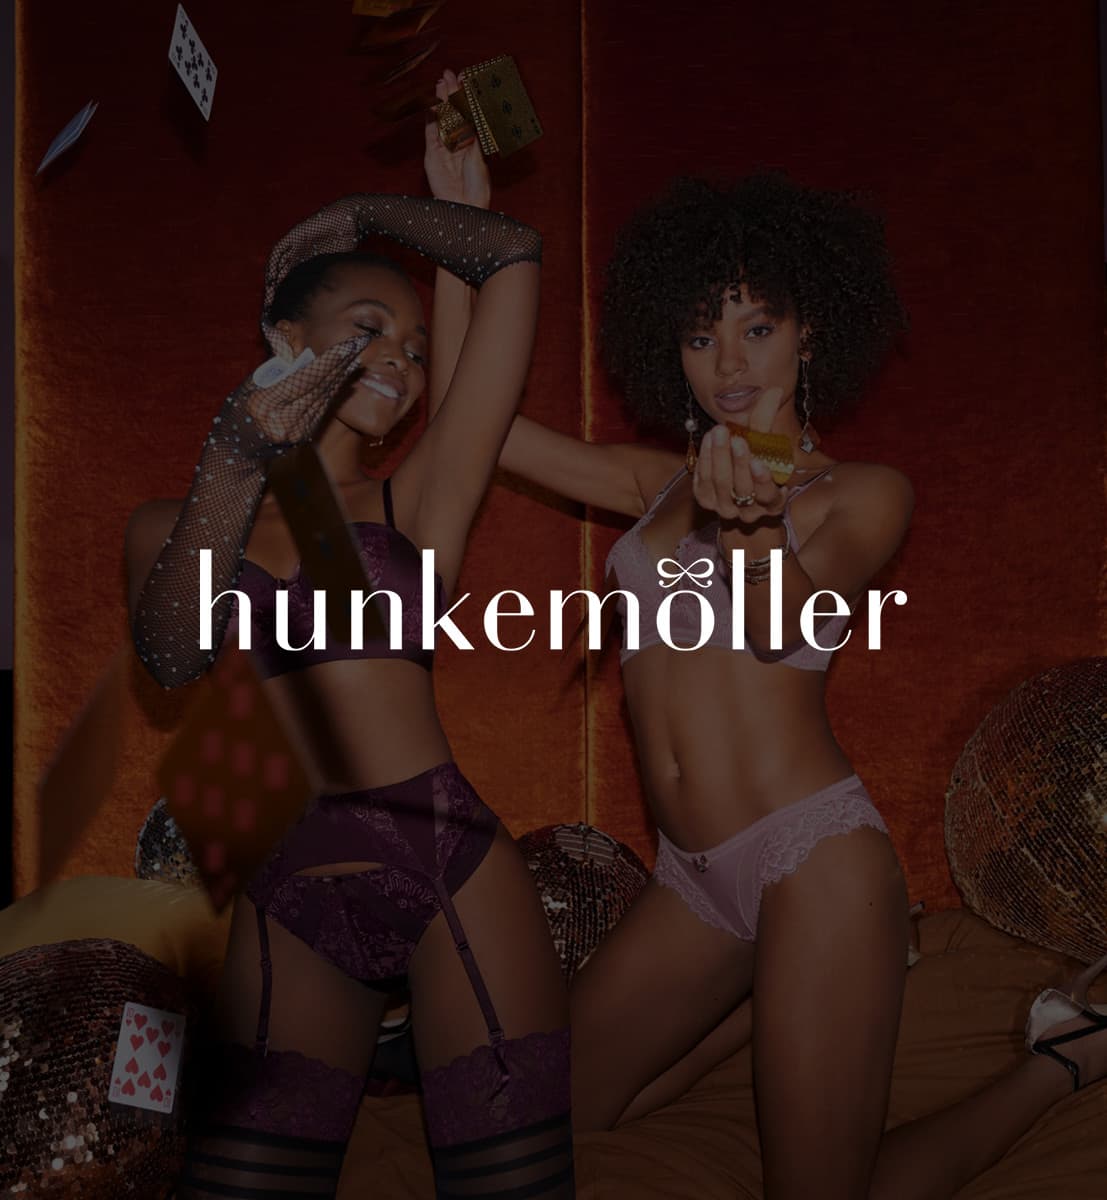 DEX international M&A advised Hunkemöller on the acquisition of 61 Dutch stores